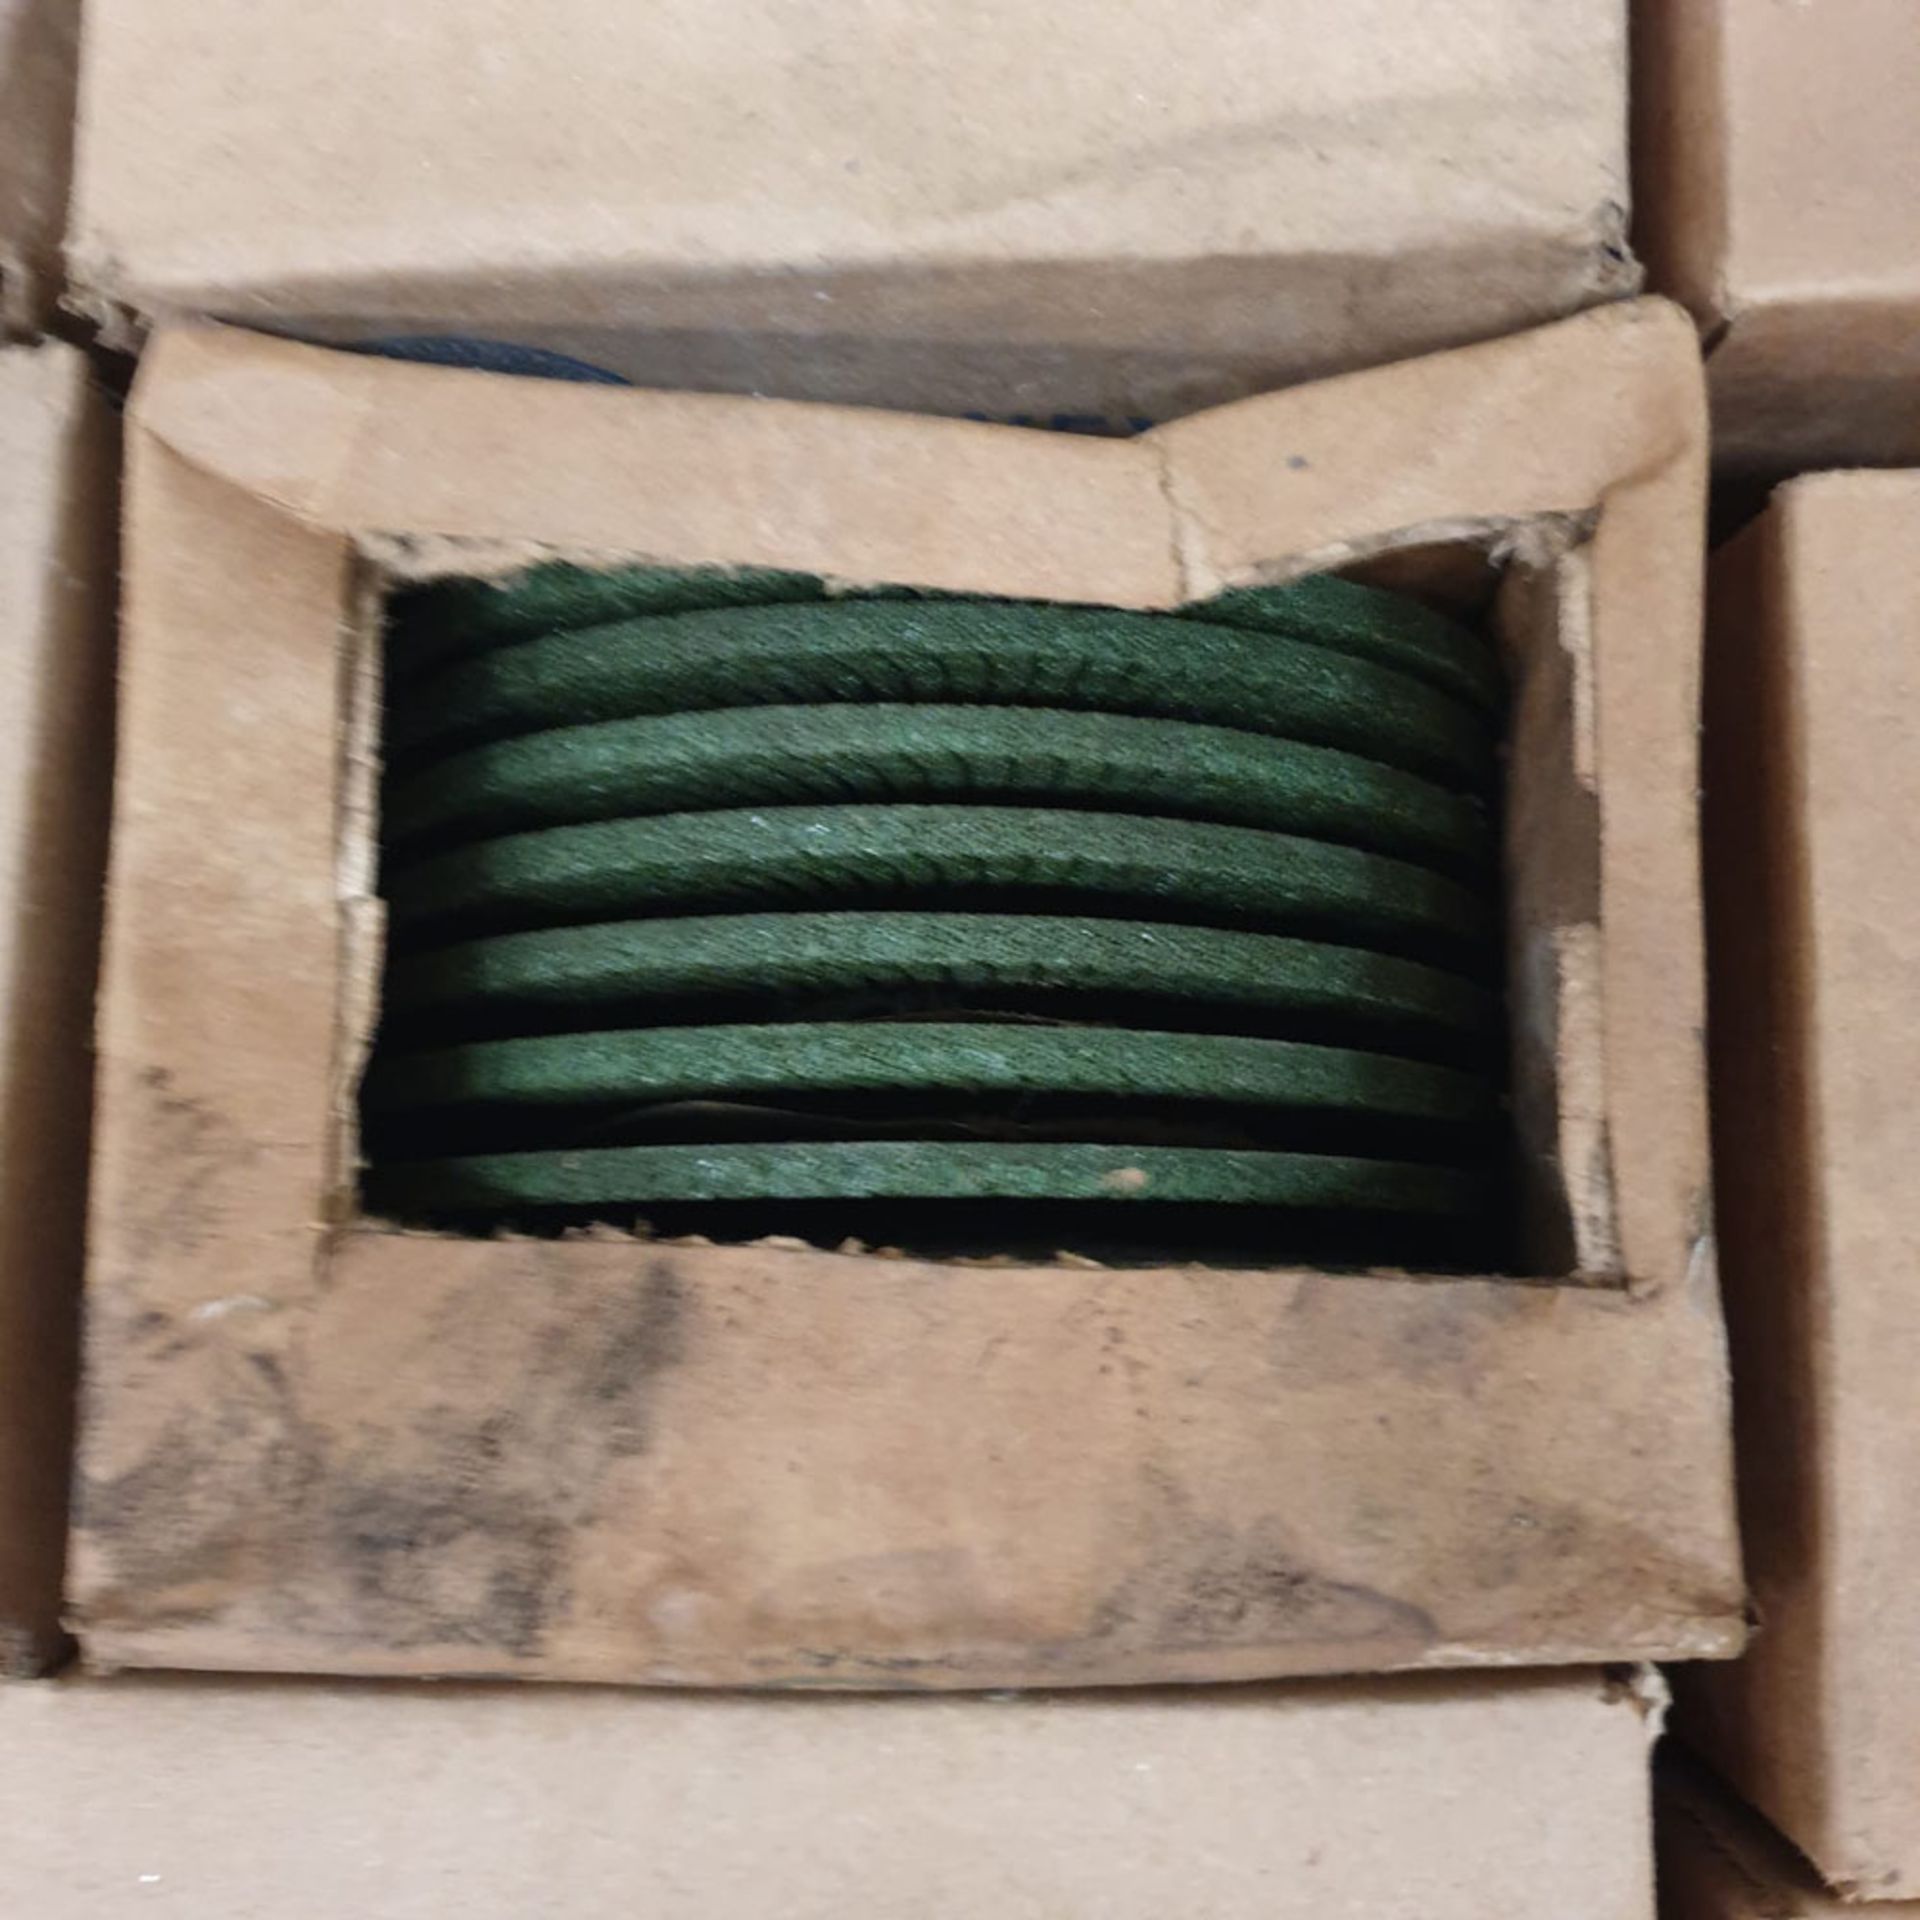 29 x Boxes of 10 ADG 125-36 Type 27 Grinding Disks. Size 125 x 4.5mm. - Image 3 of 3